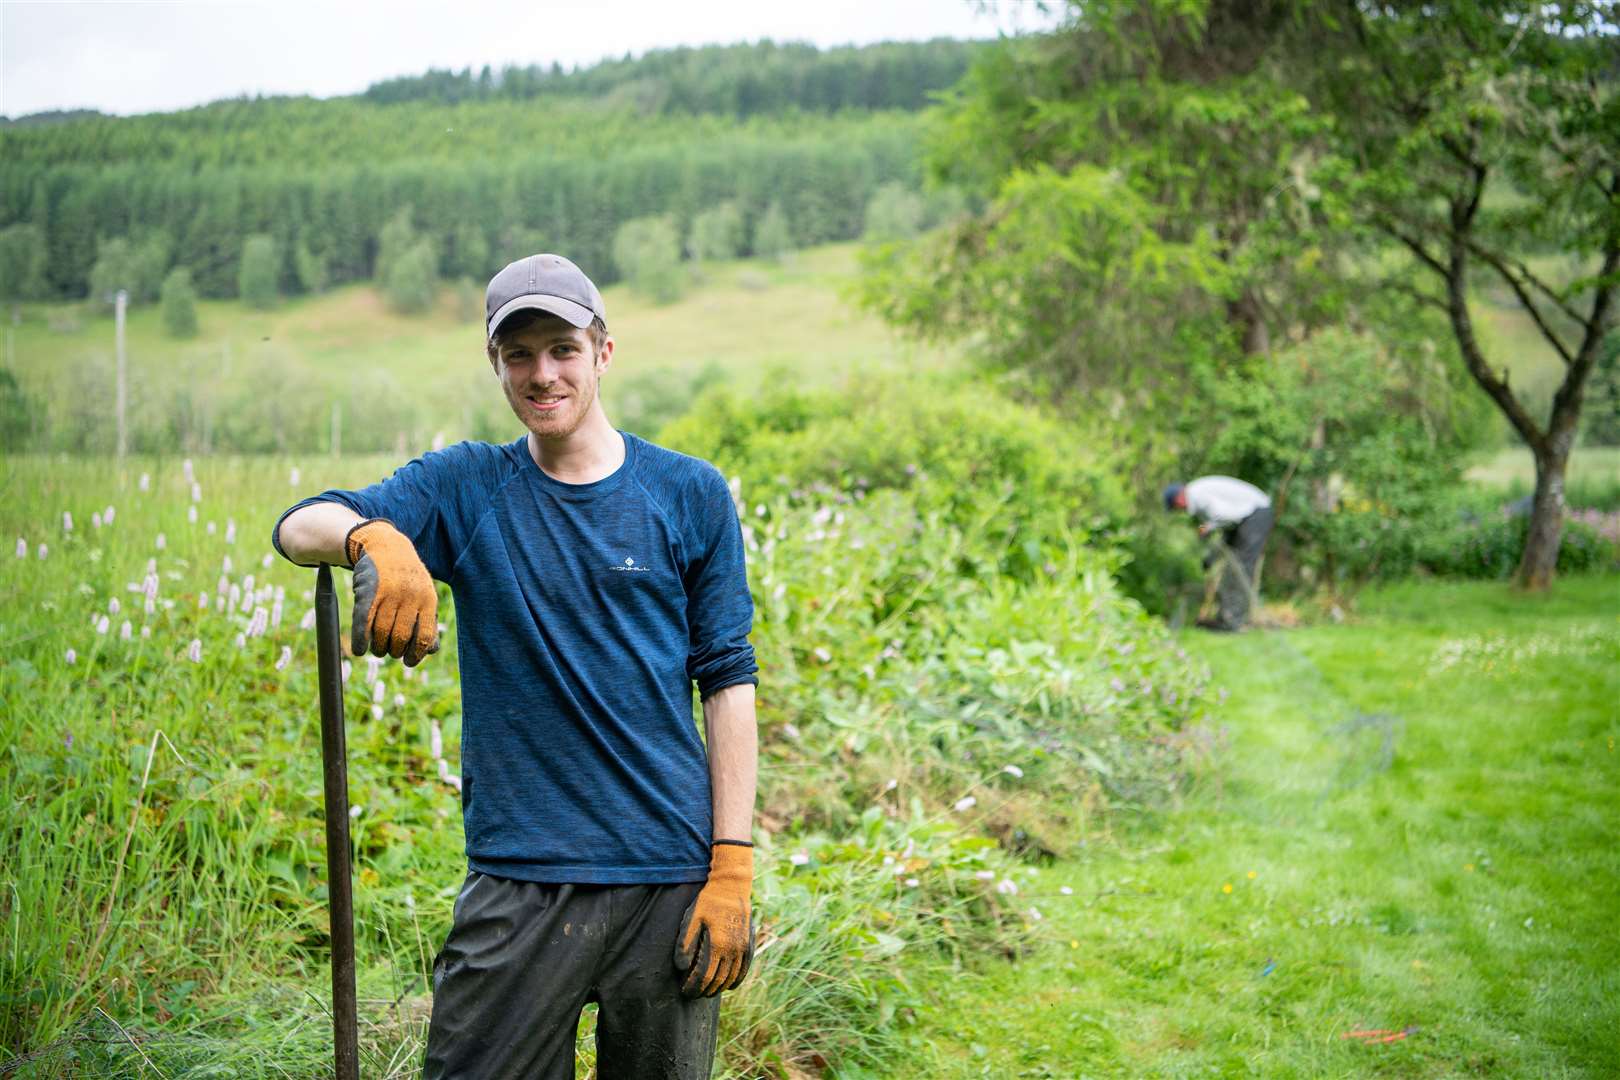 A fencing apprentice benefiting from the SSE Renewables funds.